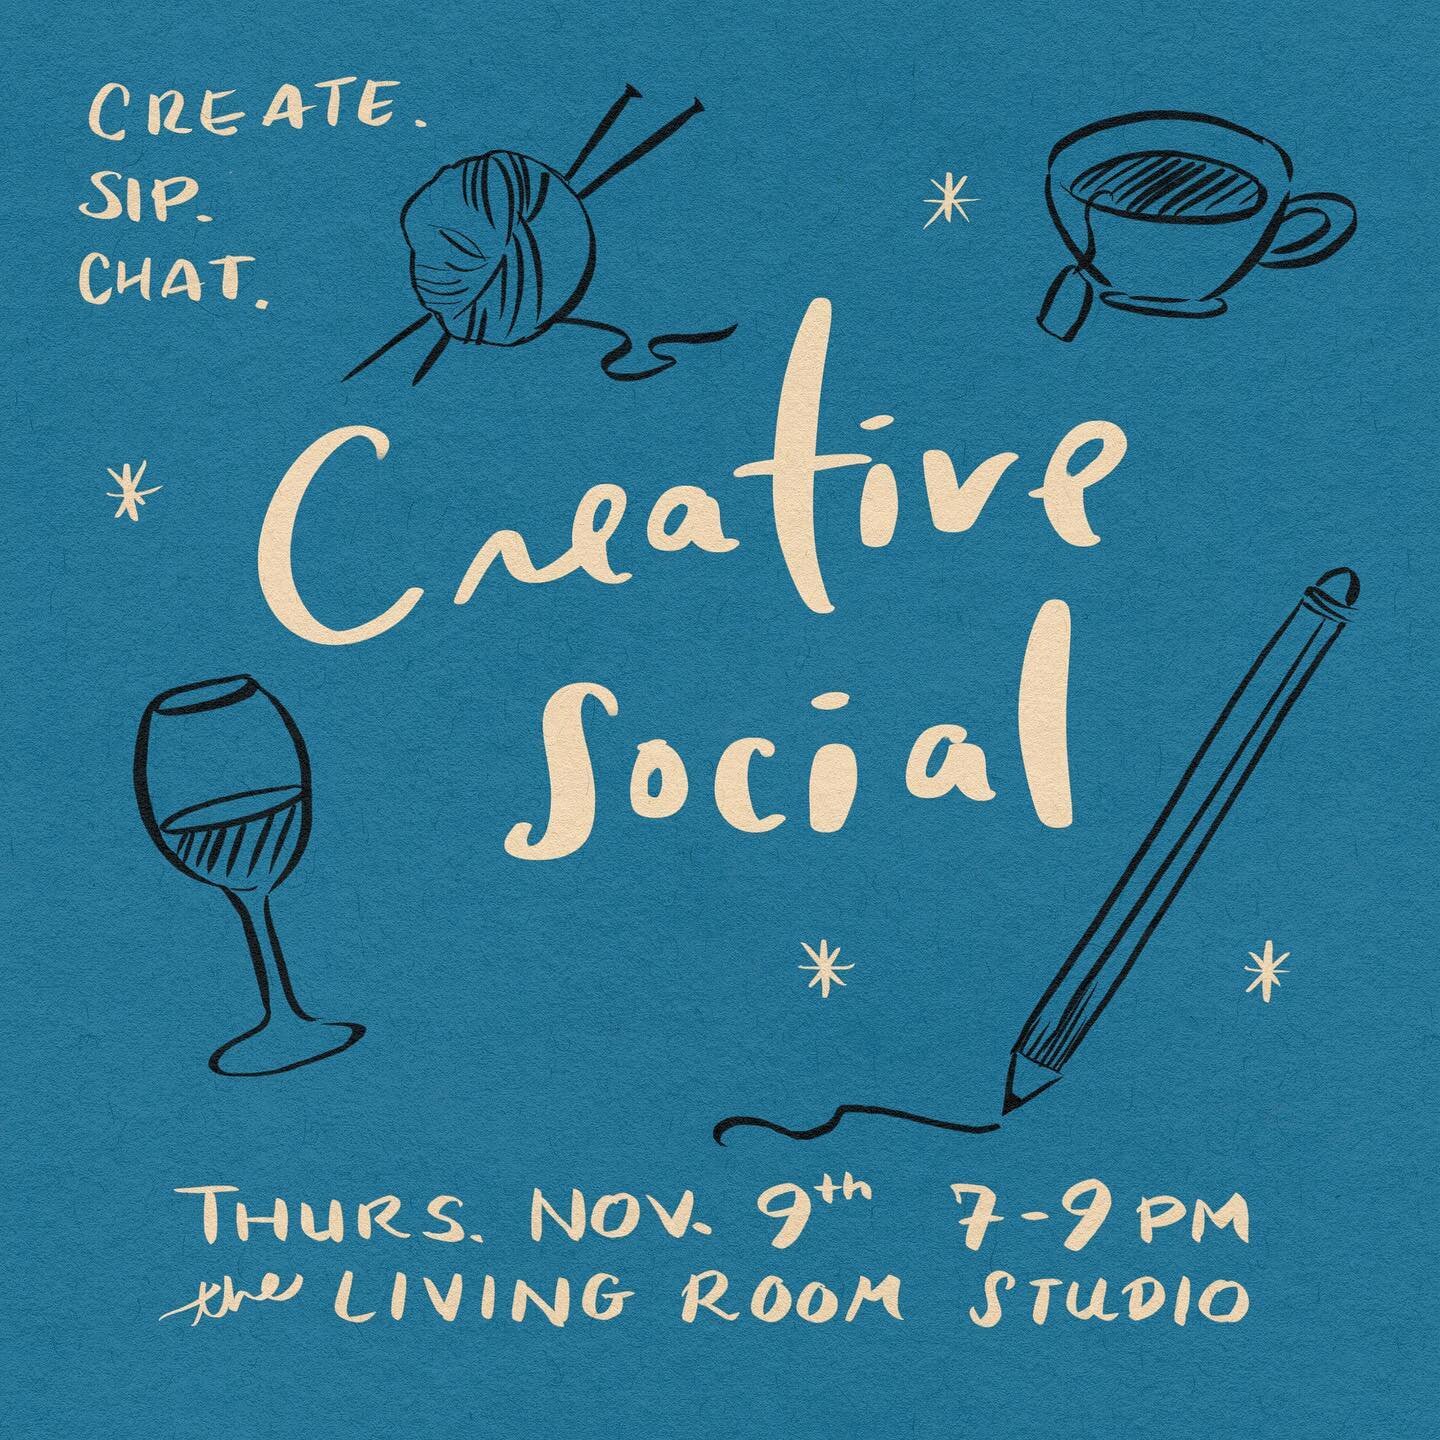 Come join for a cozy creative evening alongside good people, with a cup of tea or glass of wine. Draw, paint, stitch, knit&hellip;bring whatever creative project you&rsquo;d like to work on. Drinks by donation. Please RSVP (dm us).

Where: Living Roo